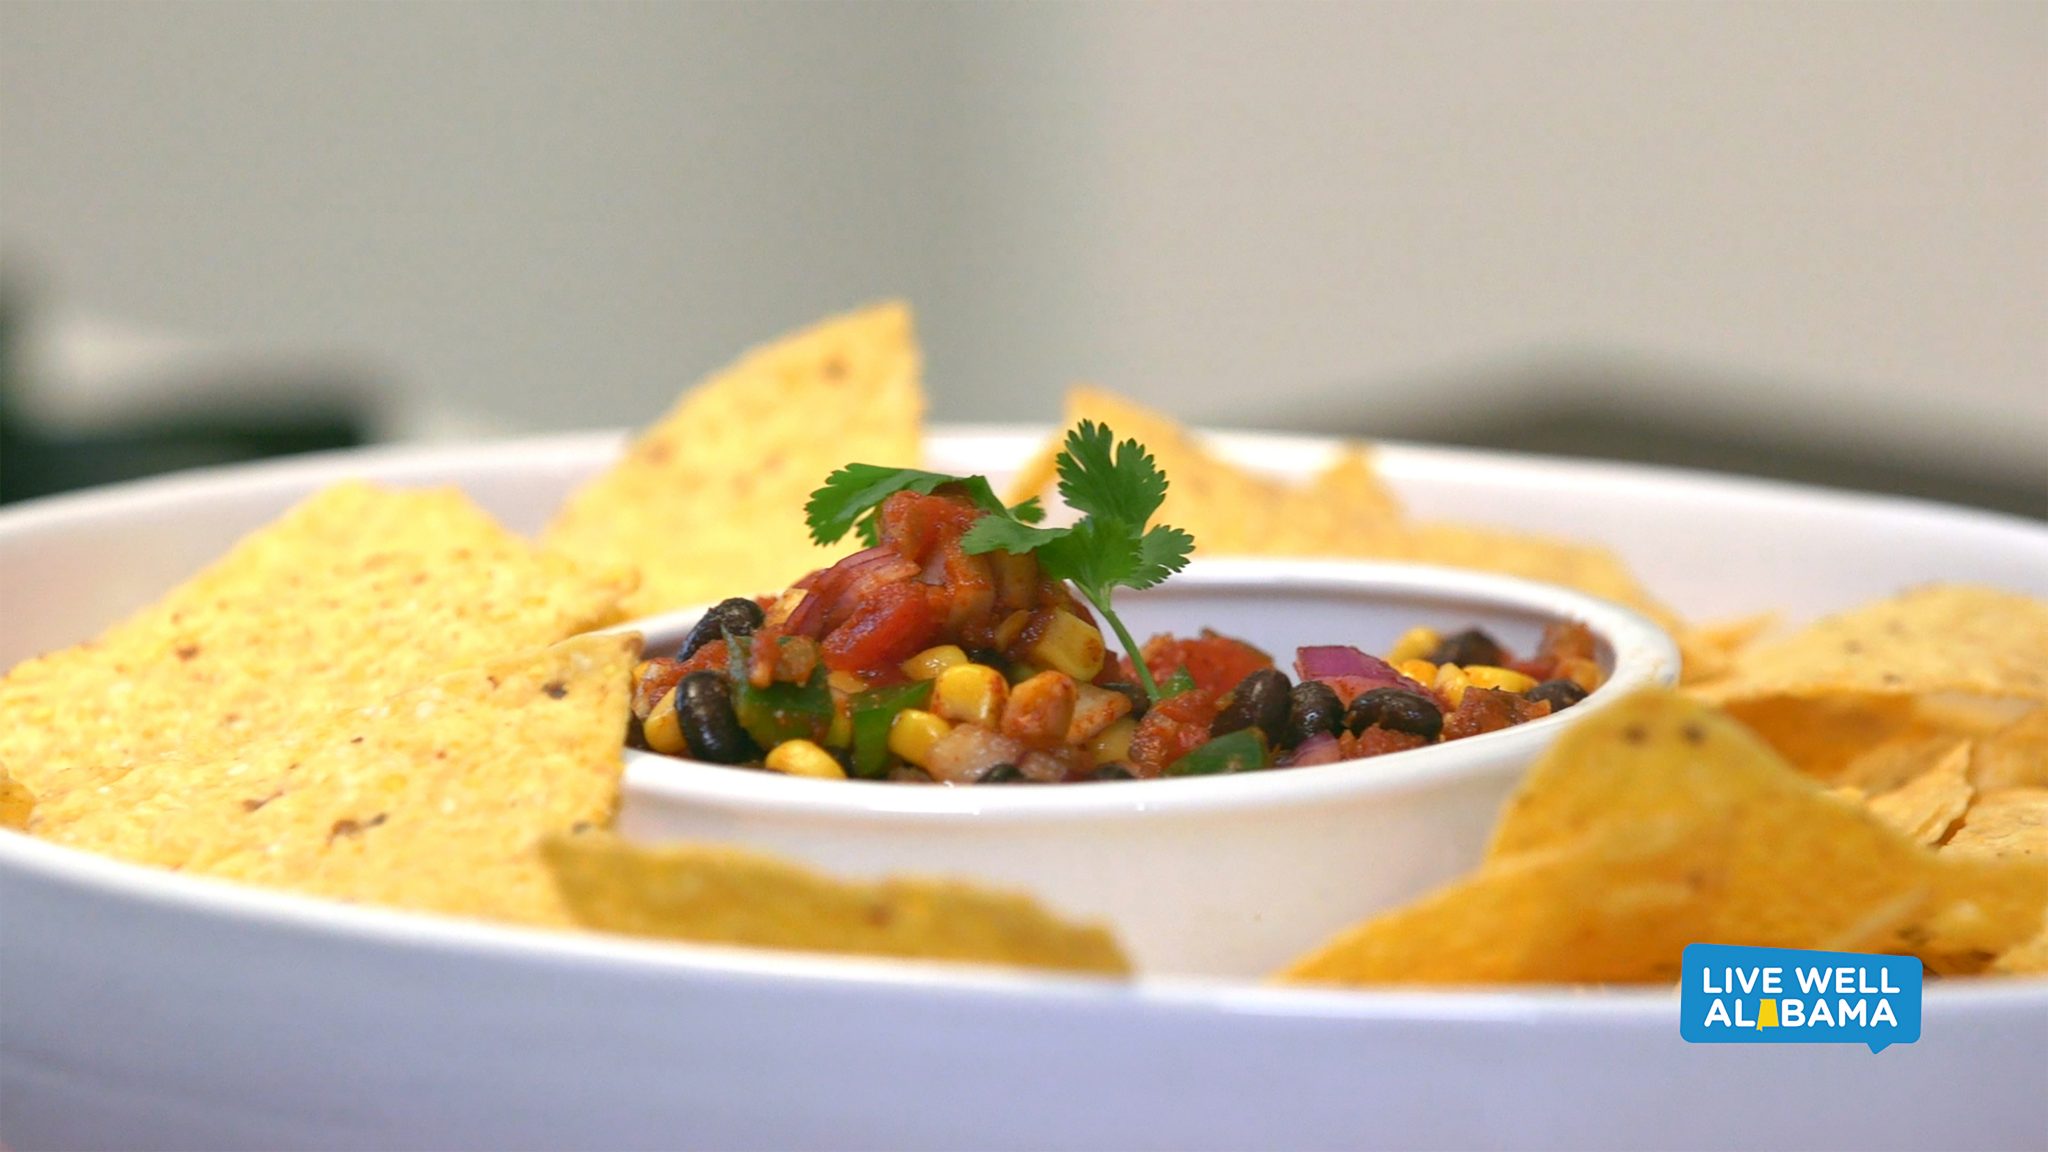 Live Well Alabama recipe, Tasty Taco Dip. Served with corn chips.